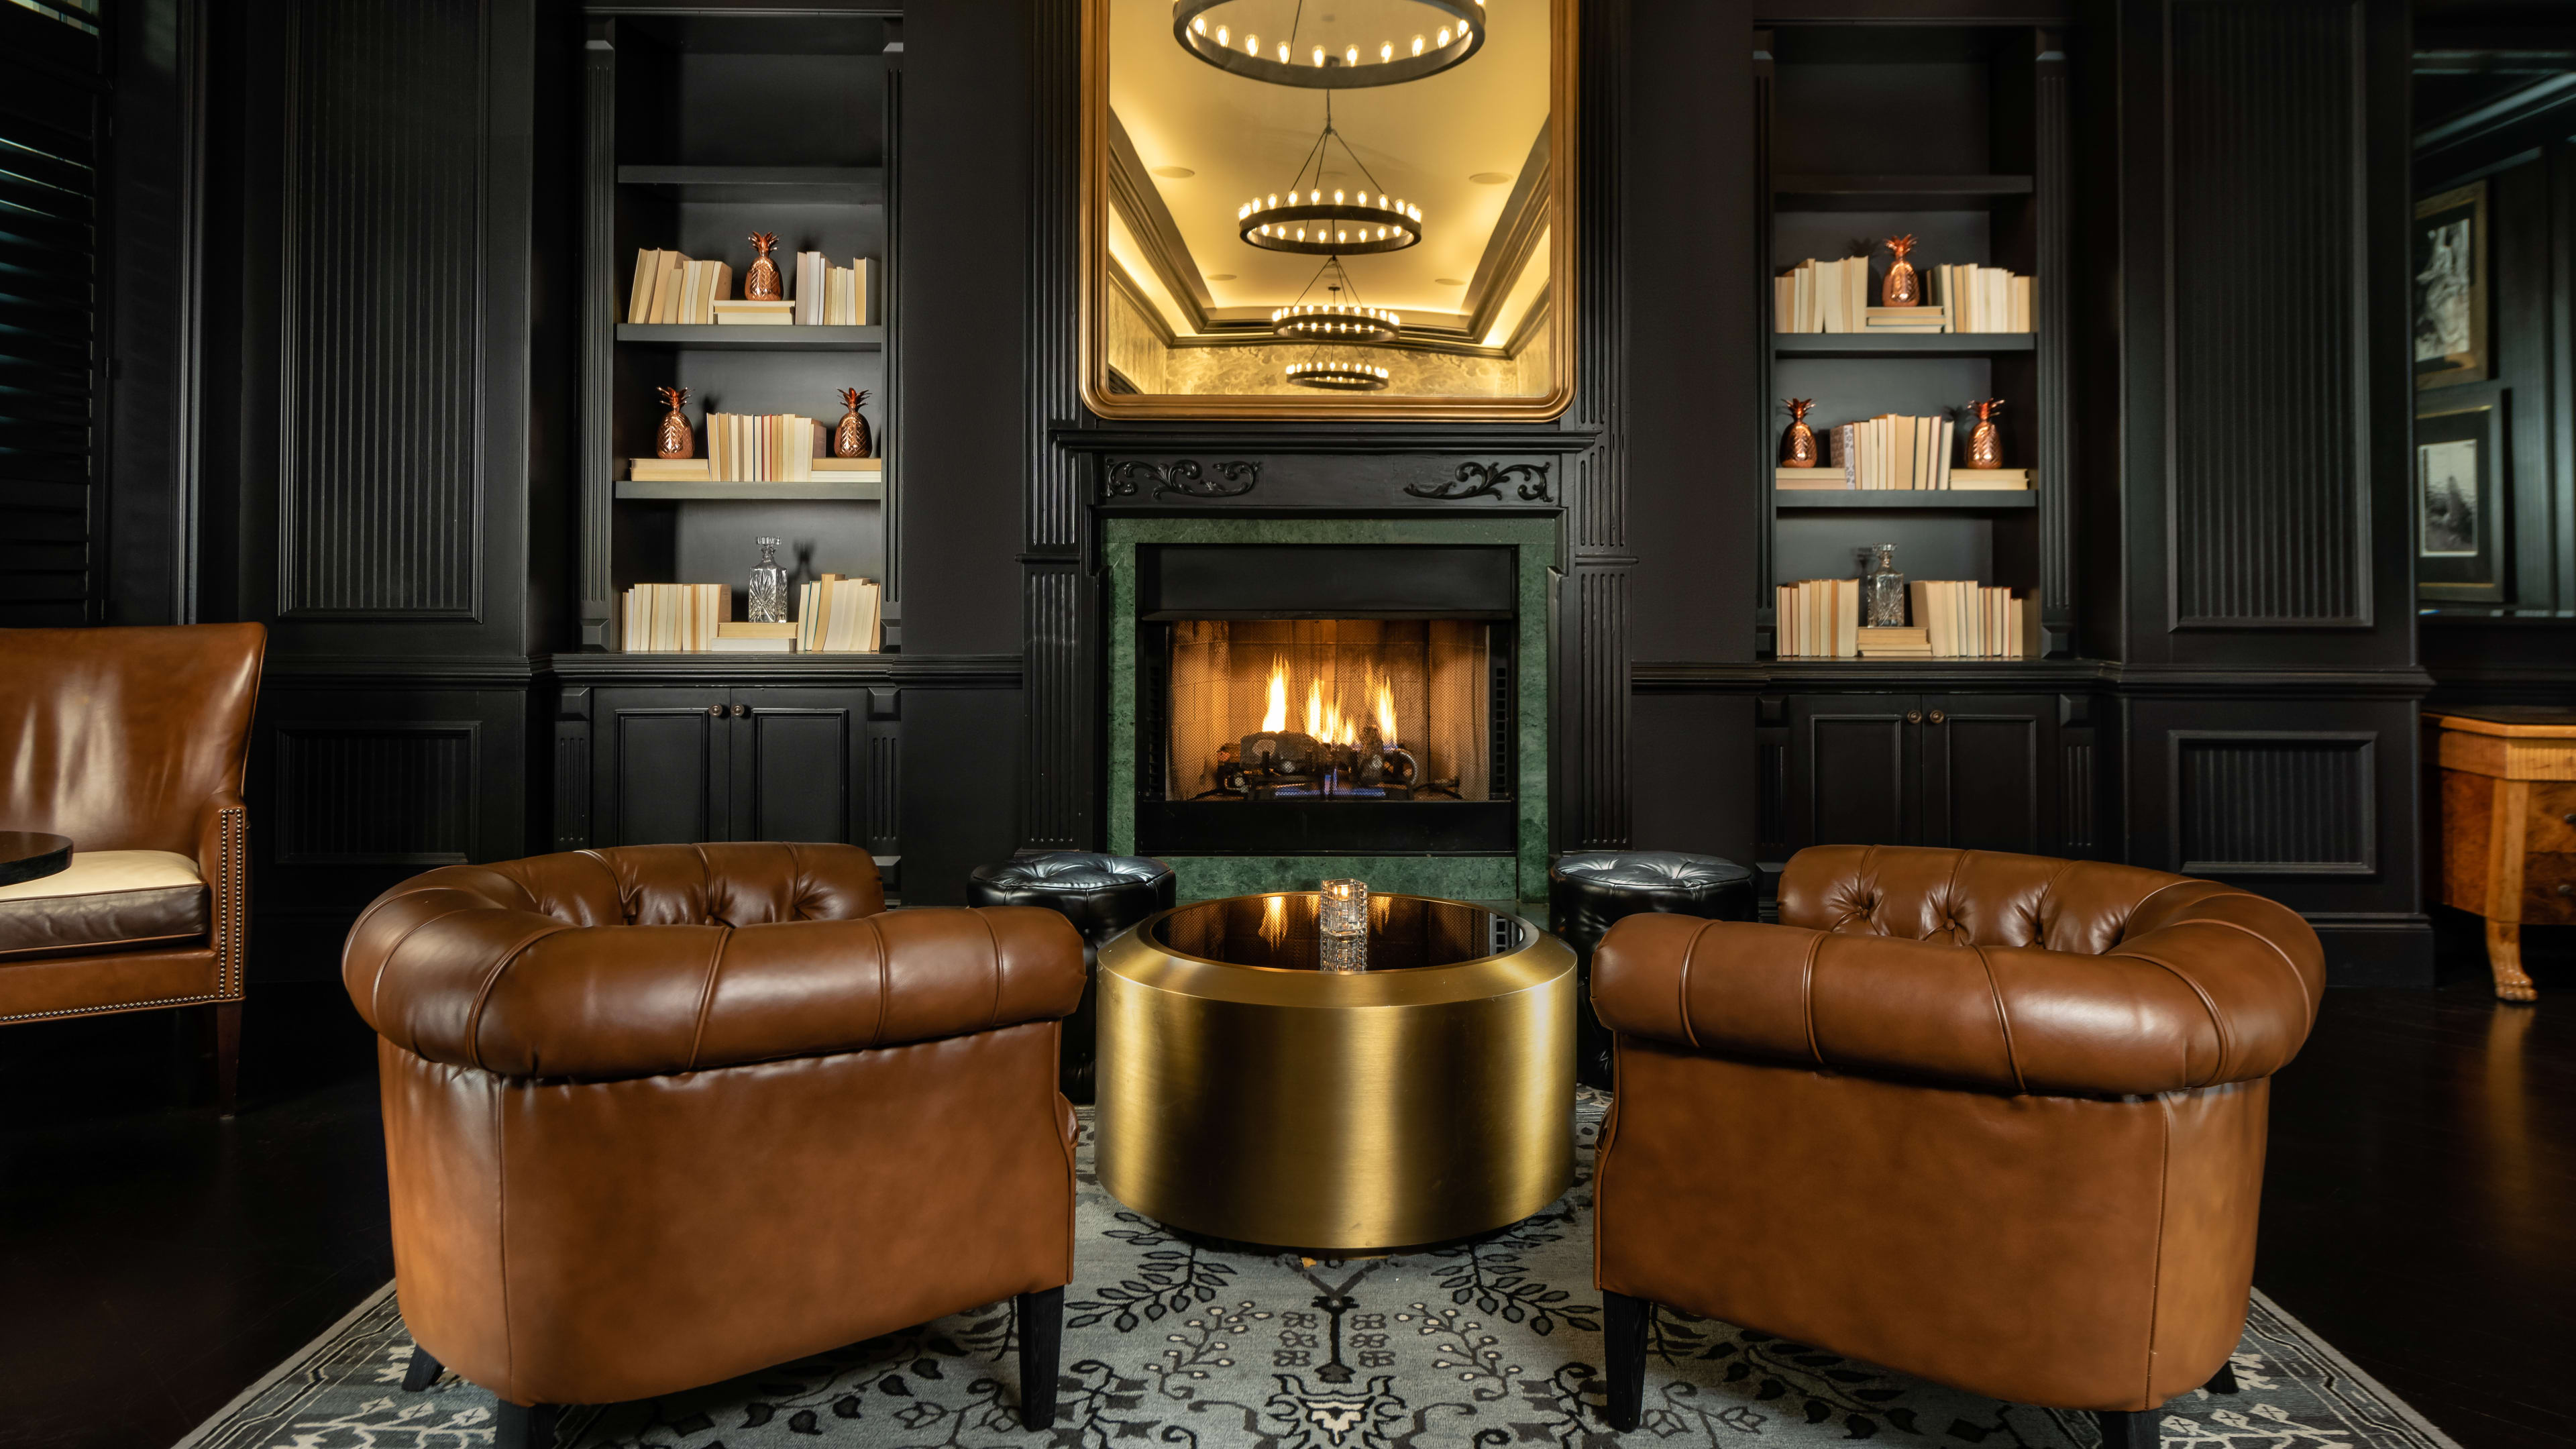 The Commodore Bar with a lit fireplace and leather chairs